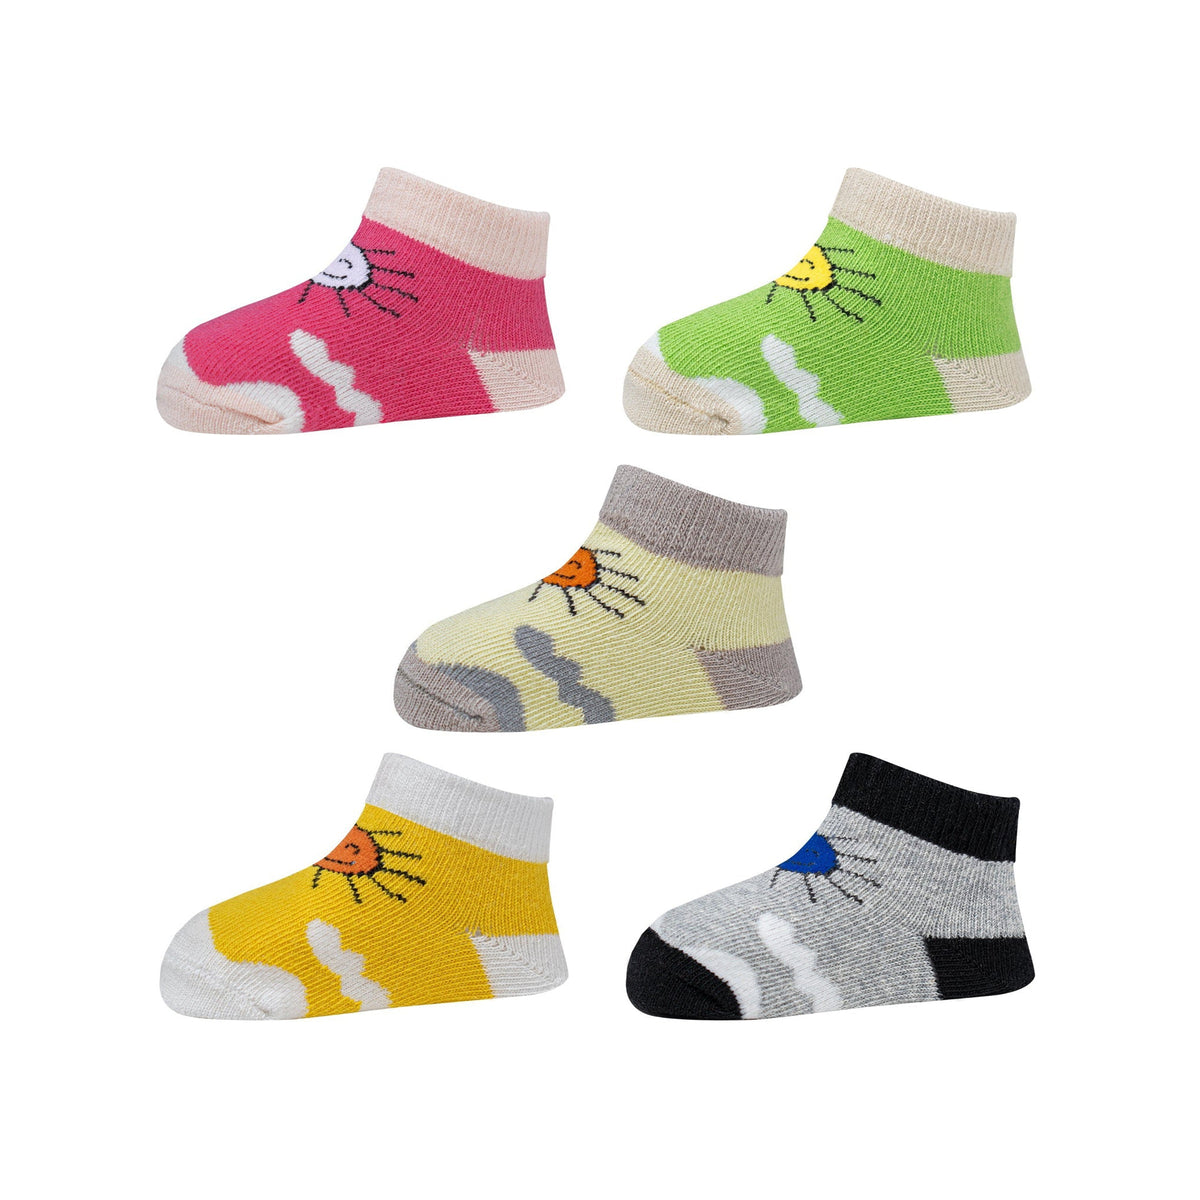 Kids Cotton Antibacterial Ankle length Socks - YW-ASP-8018 - Pack of 5 Pairs